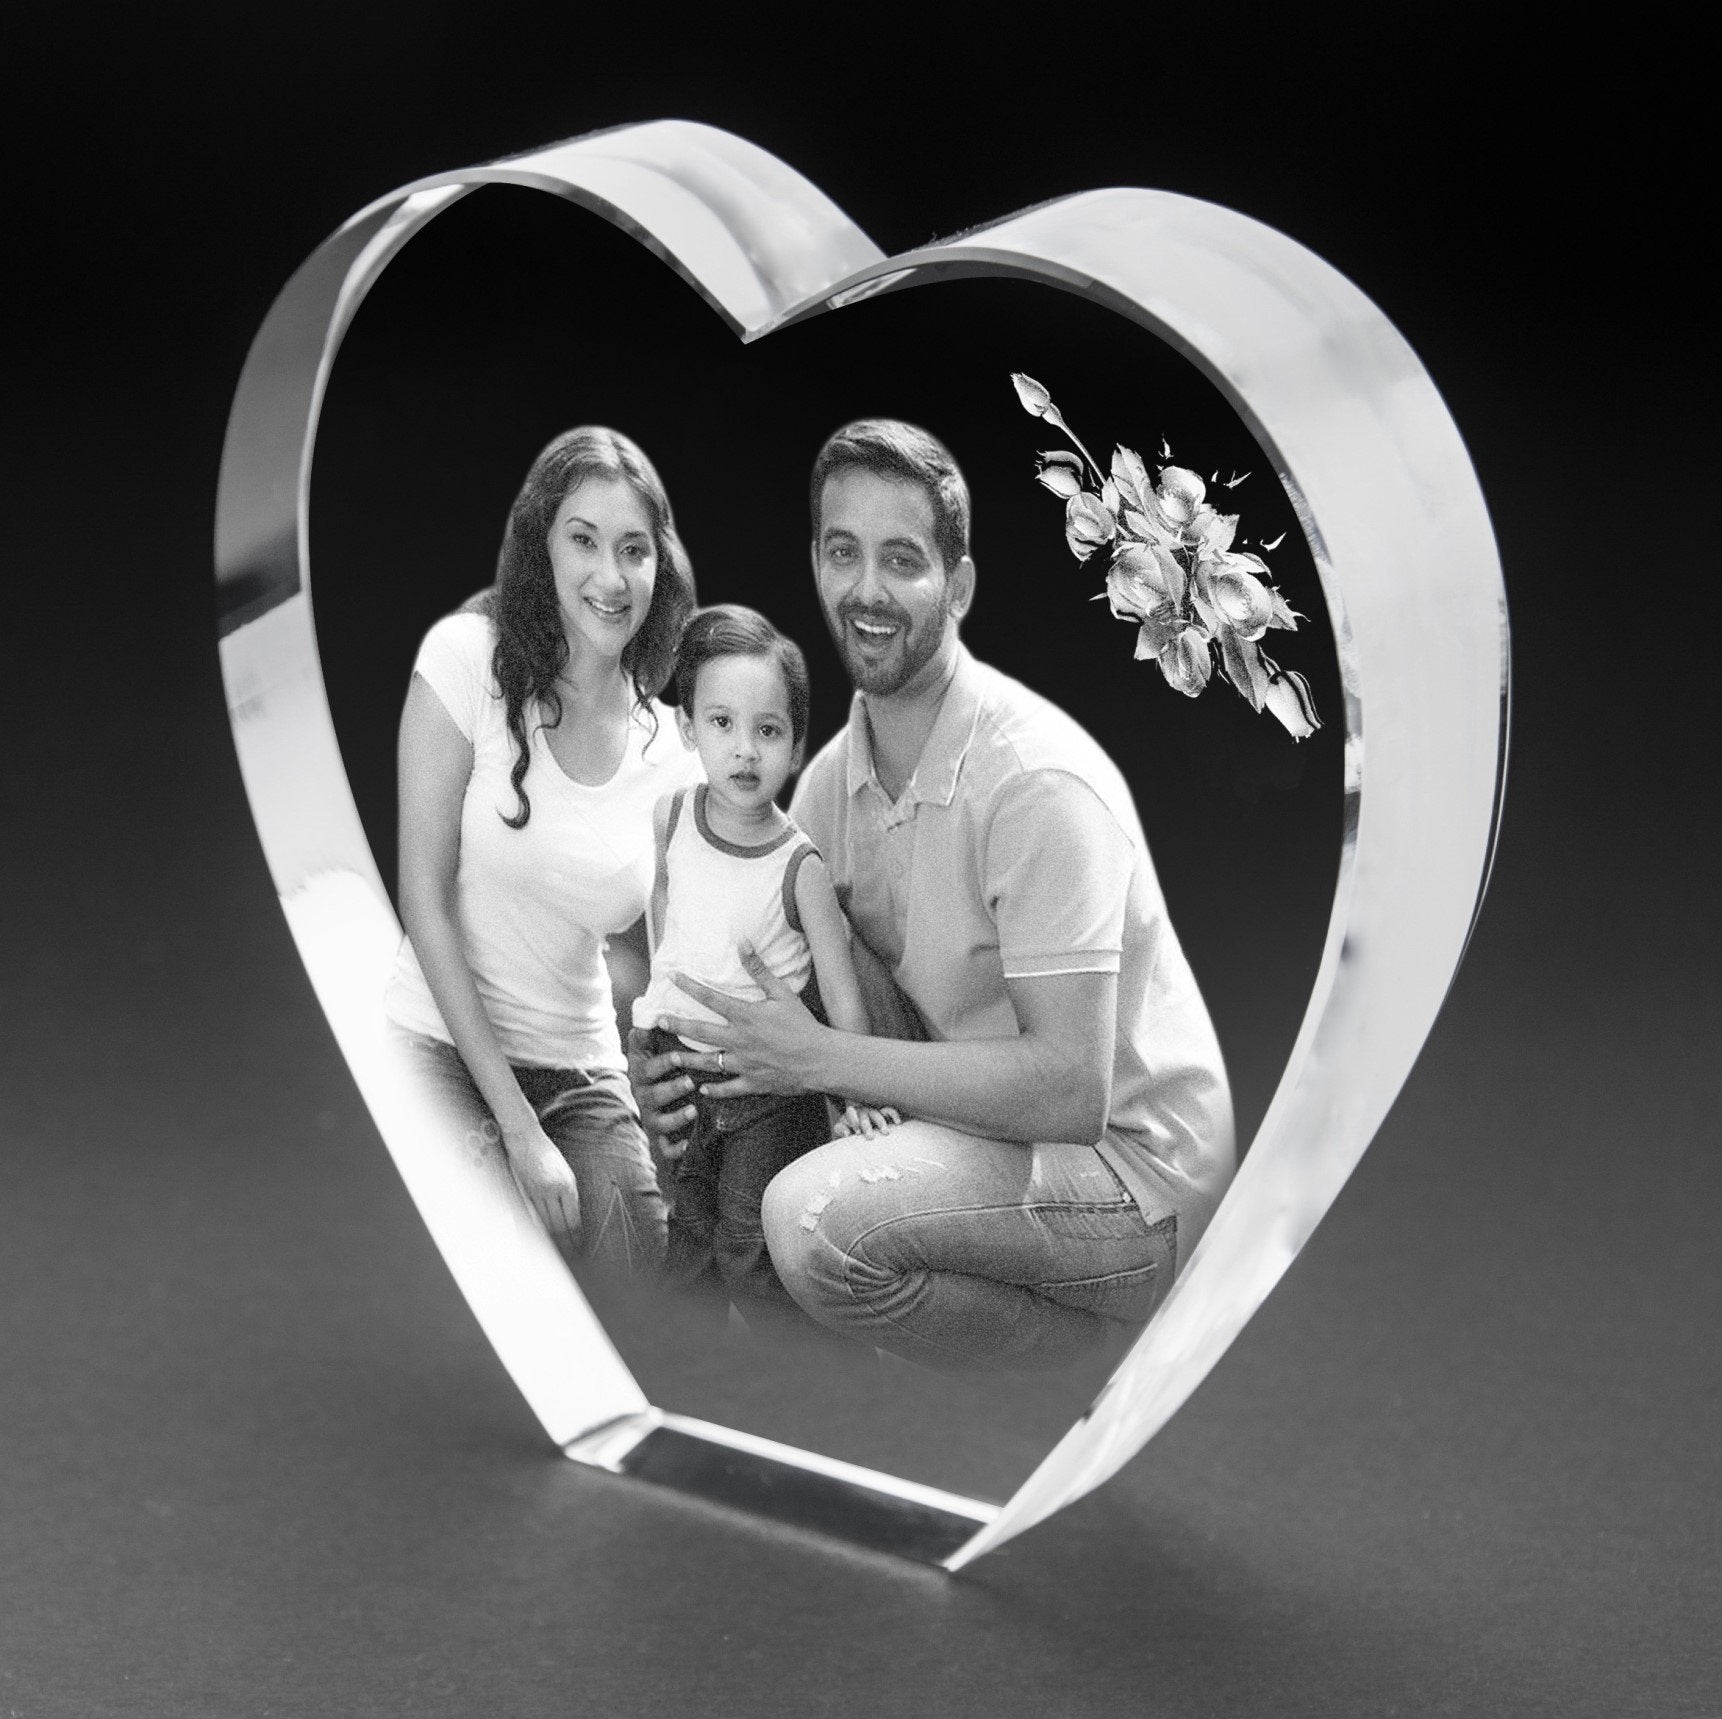 Marriage Anniversary Gifts For Couple Ideas - Buy Online